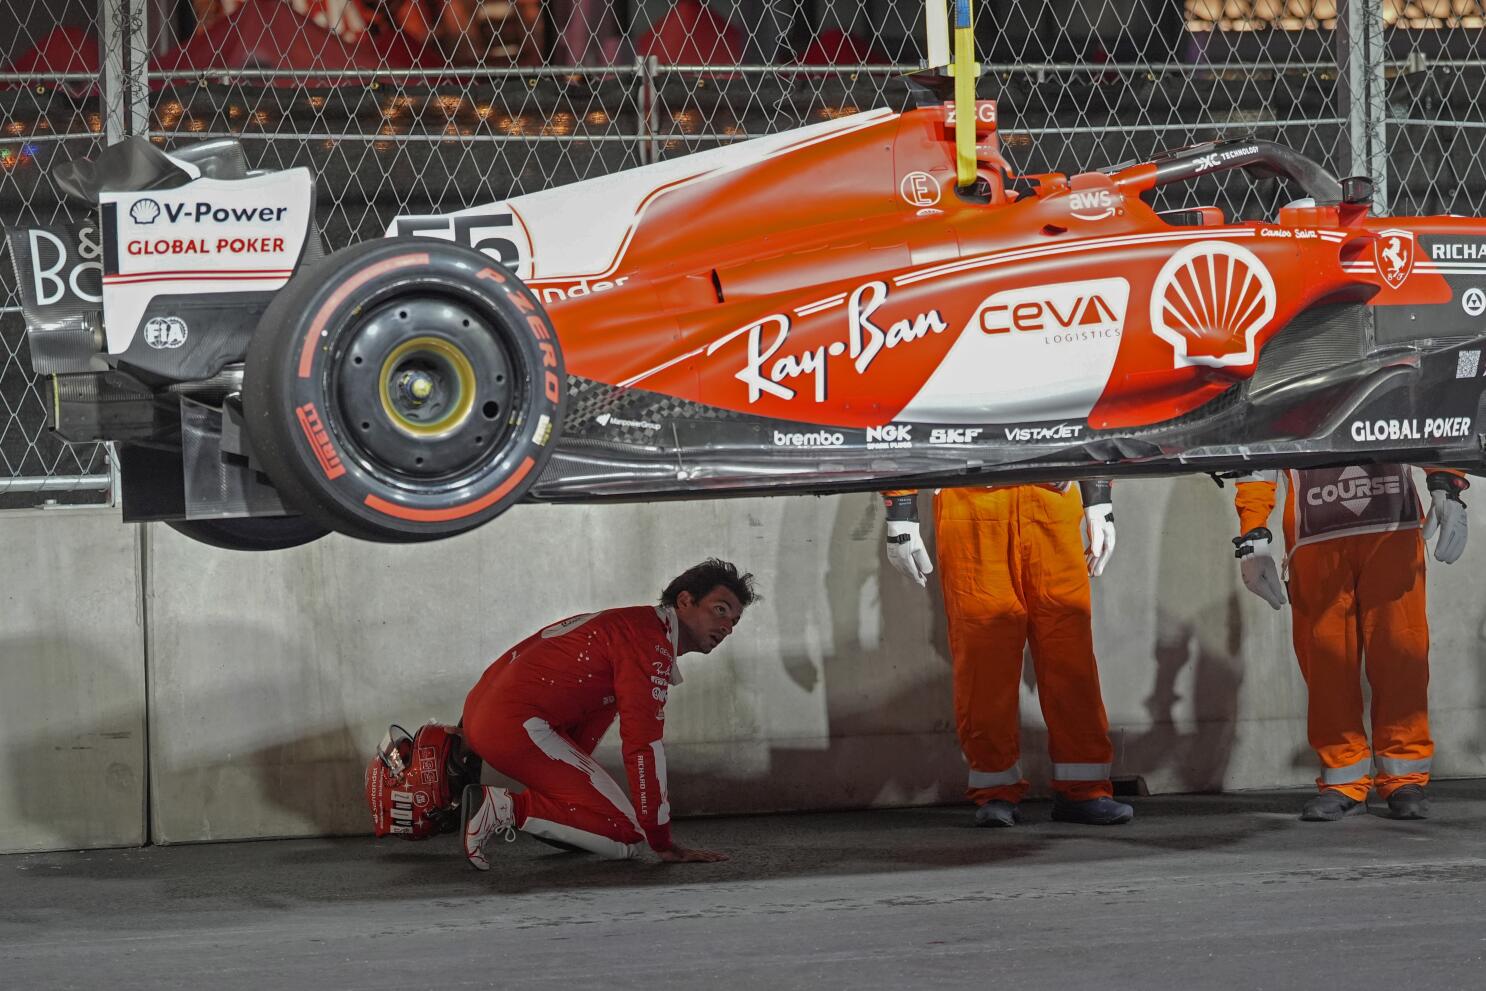 F1 off to rough Las Vegas start. Ferrari damaged, fans told to leave before  practice ends at 4 a.m. - The San Diego Union-Tribune